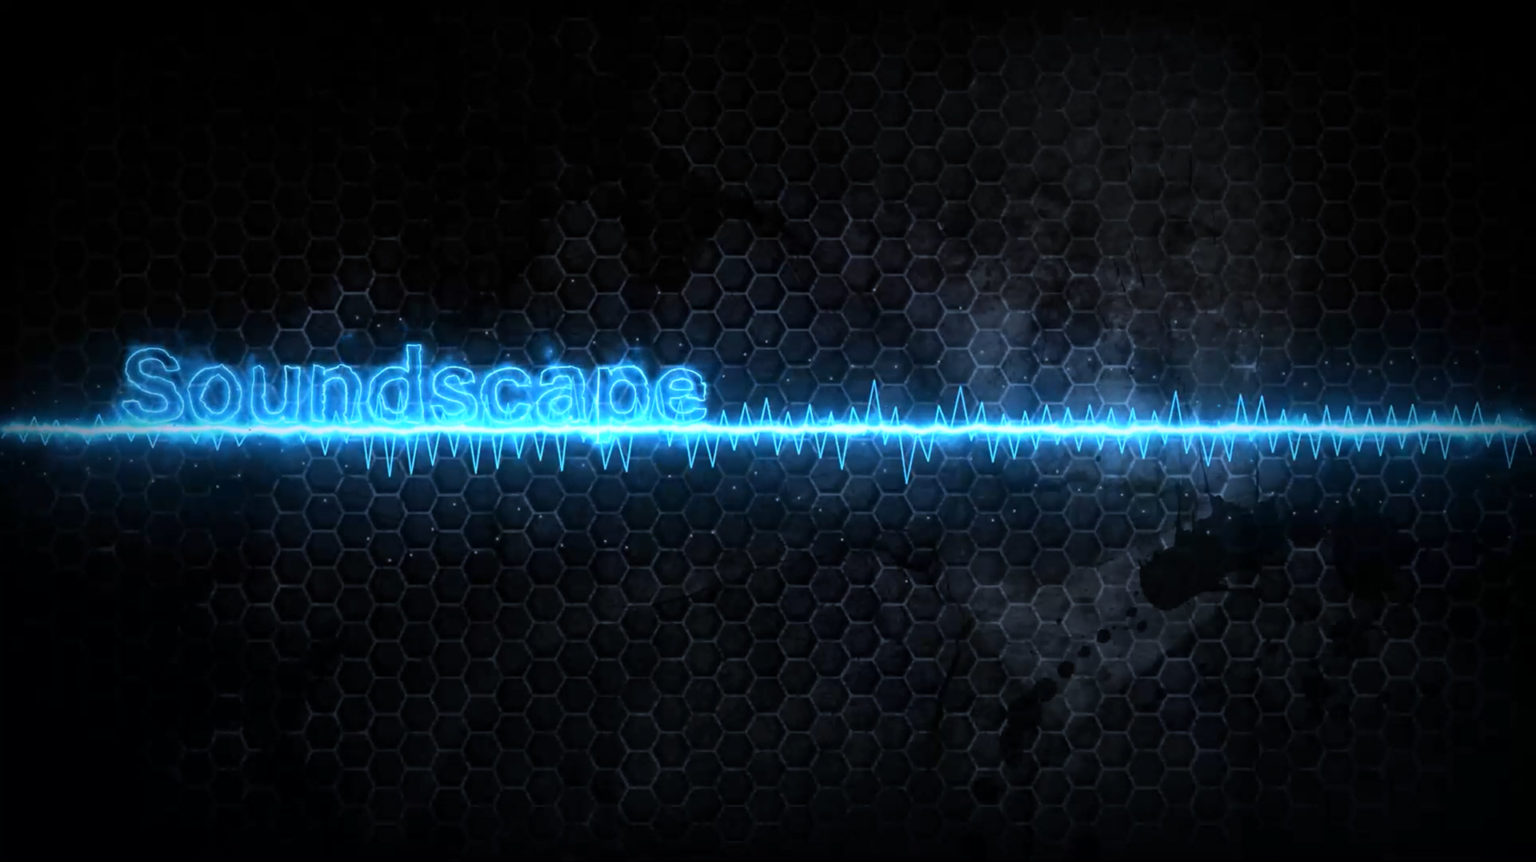 The Soundscape Banner Poster Image